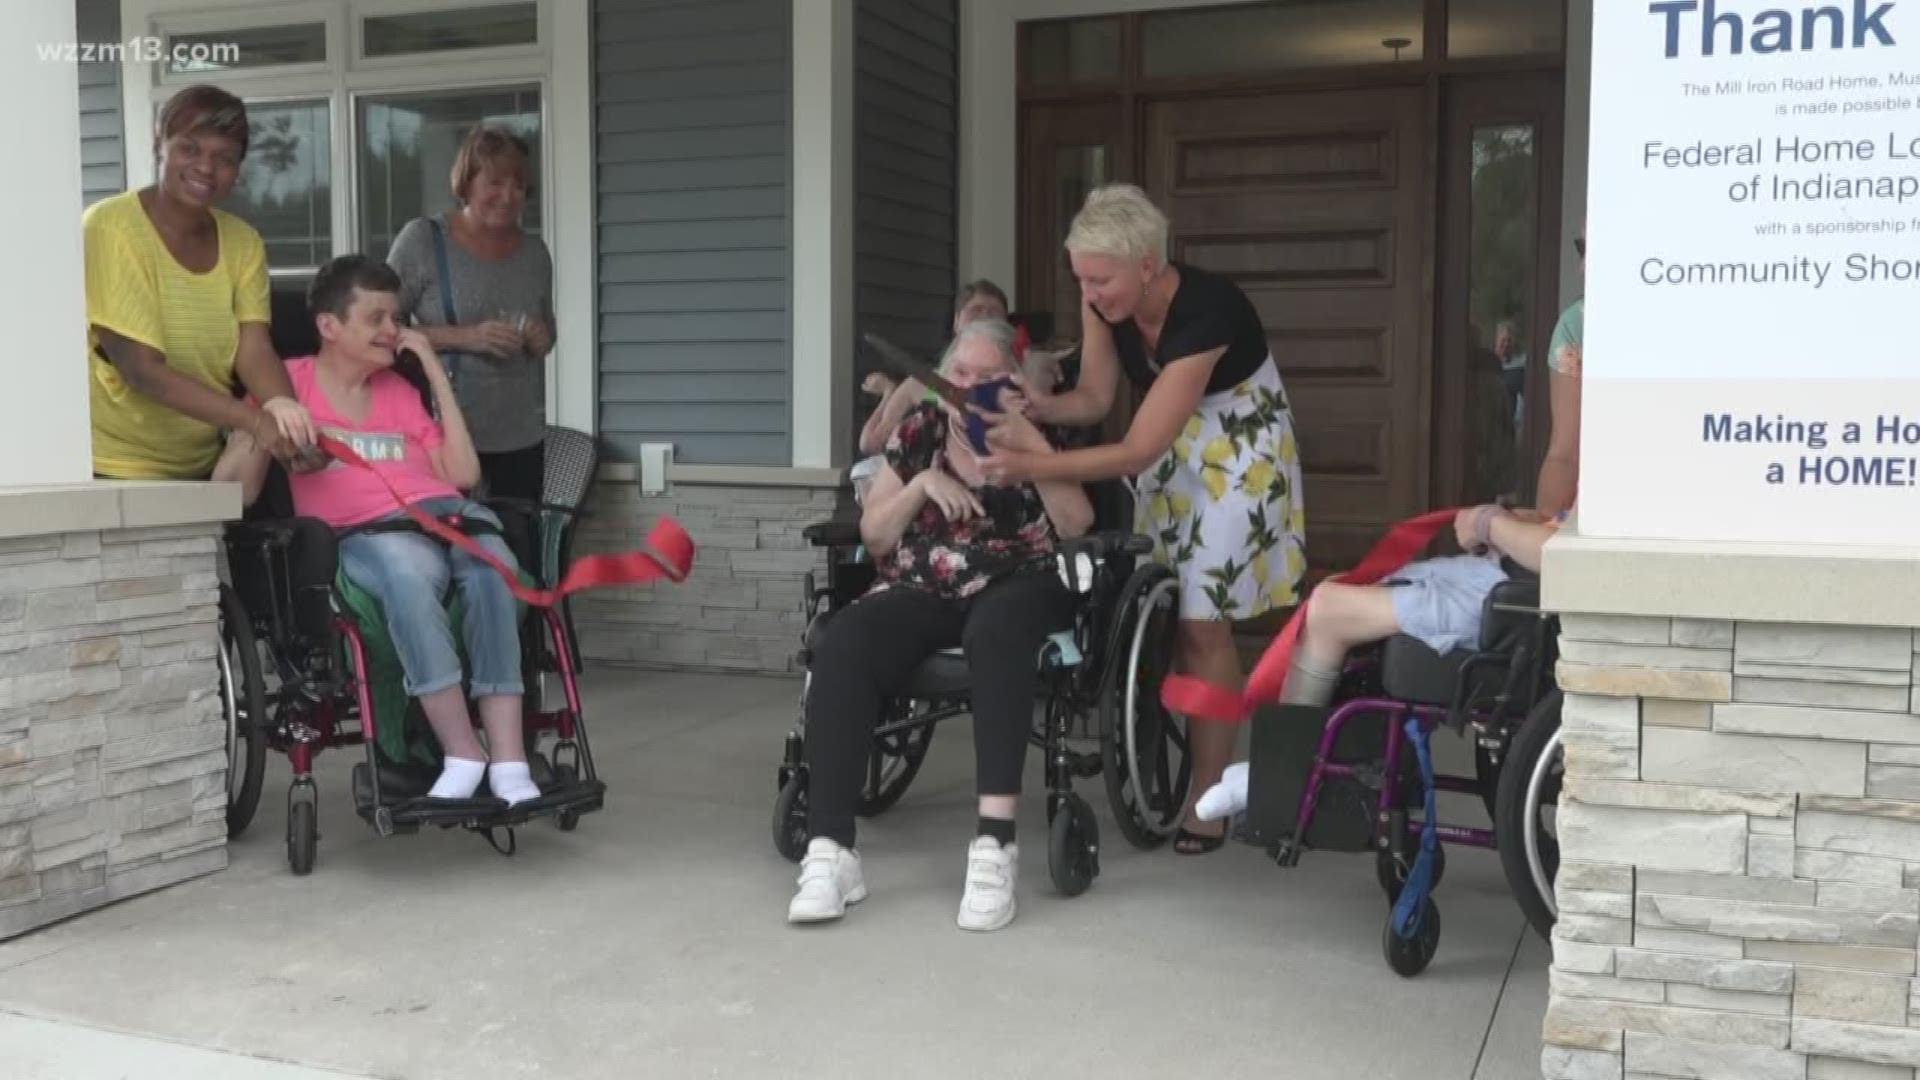 New Mill Iron Group Home opens in Muskegon